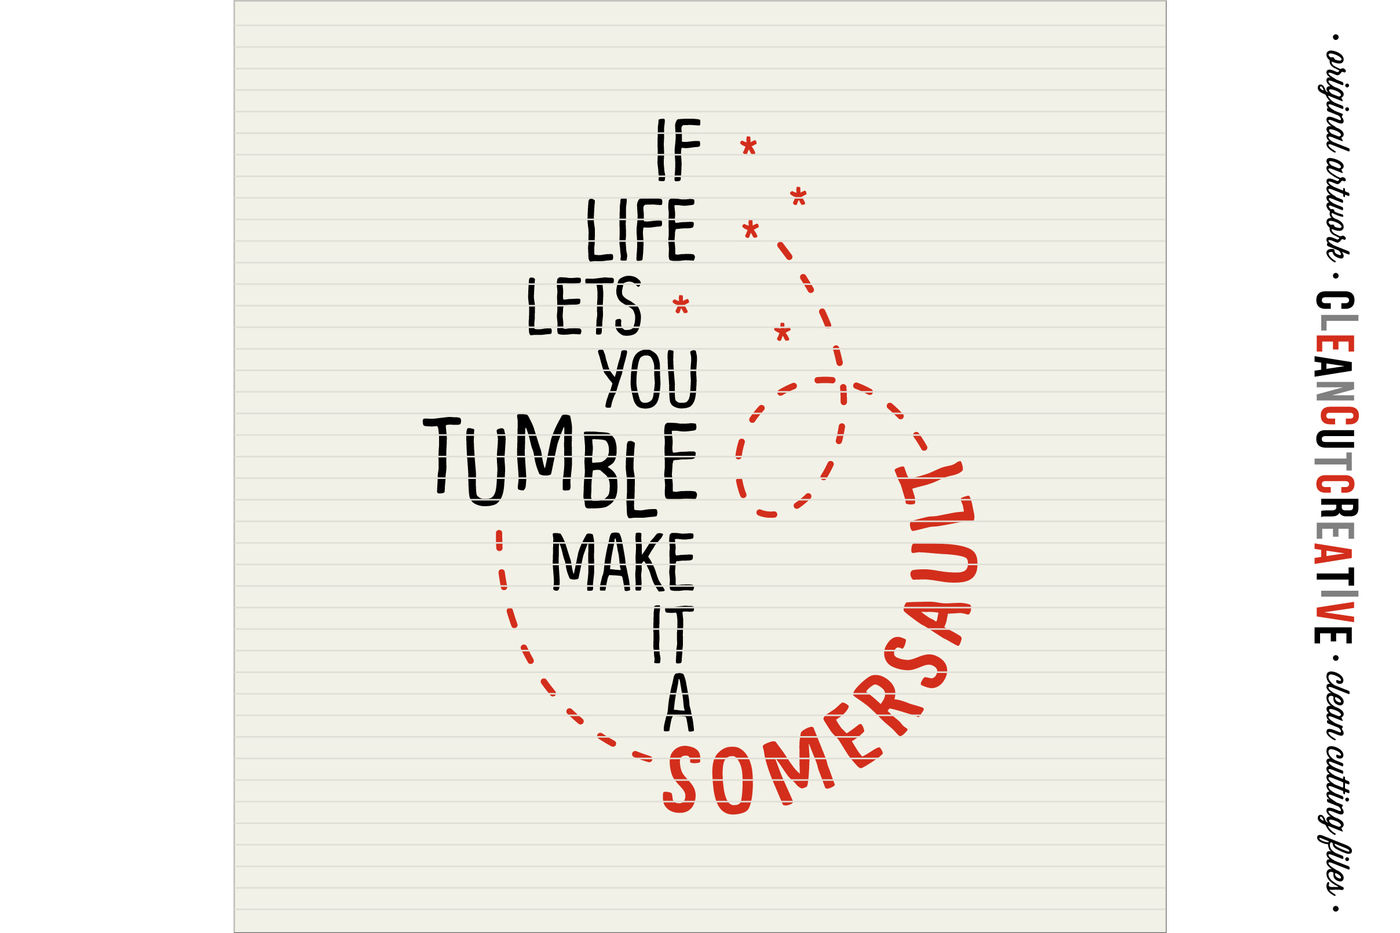 ori 85881 6c3e2ebaf2da4b60fe492c1bb38a86d43025db8c funny uplifting somersault quote svg dxf eps png cricut and silhouette clean cutting files